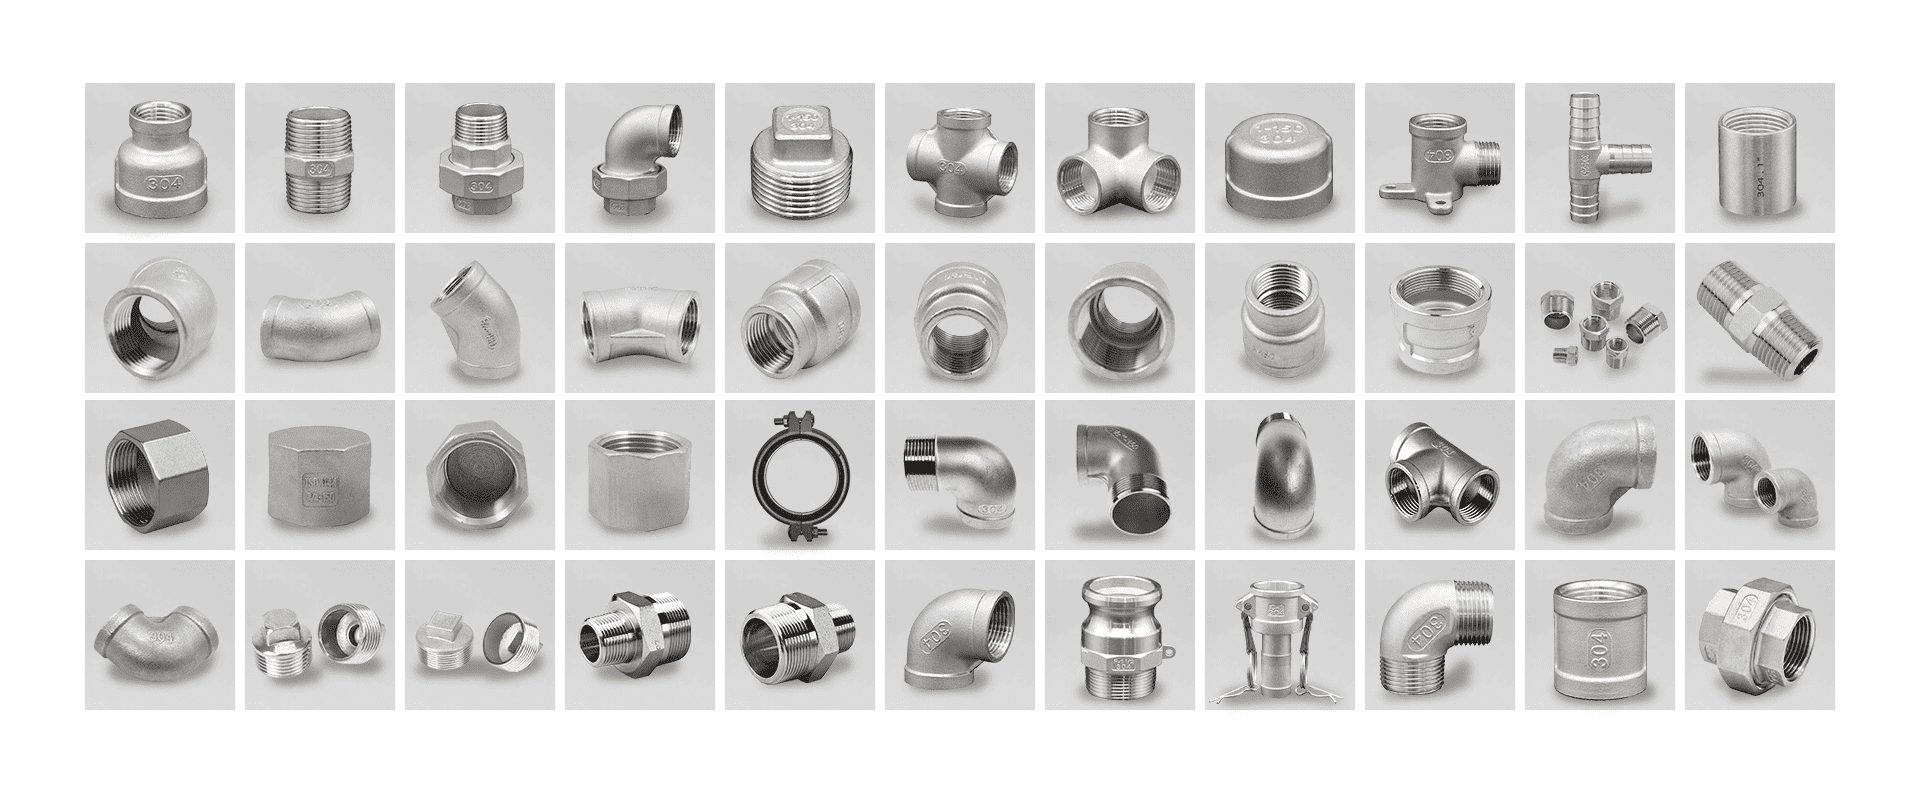 Investment Casting Stainless Steel Pipe Fittings